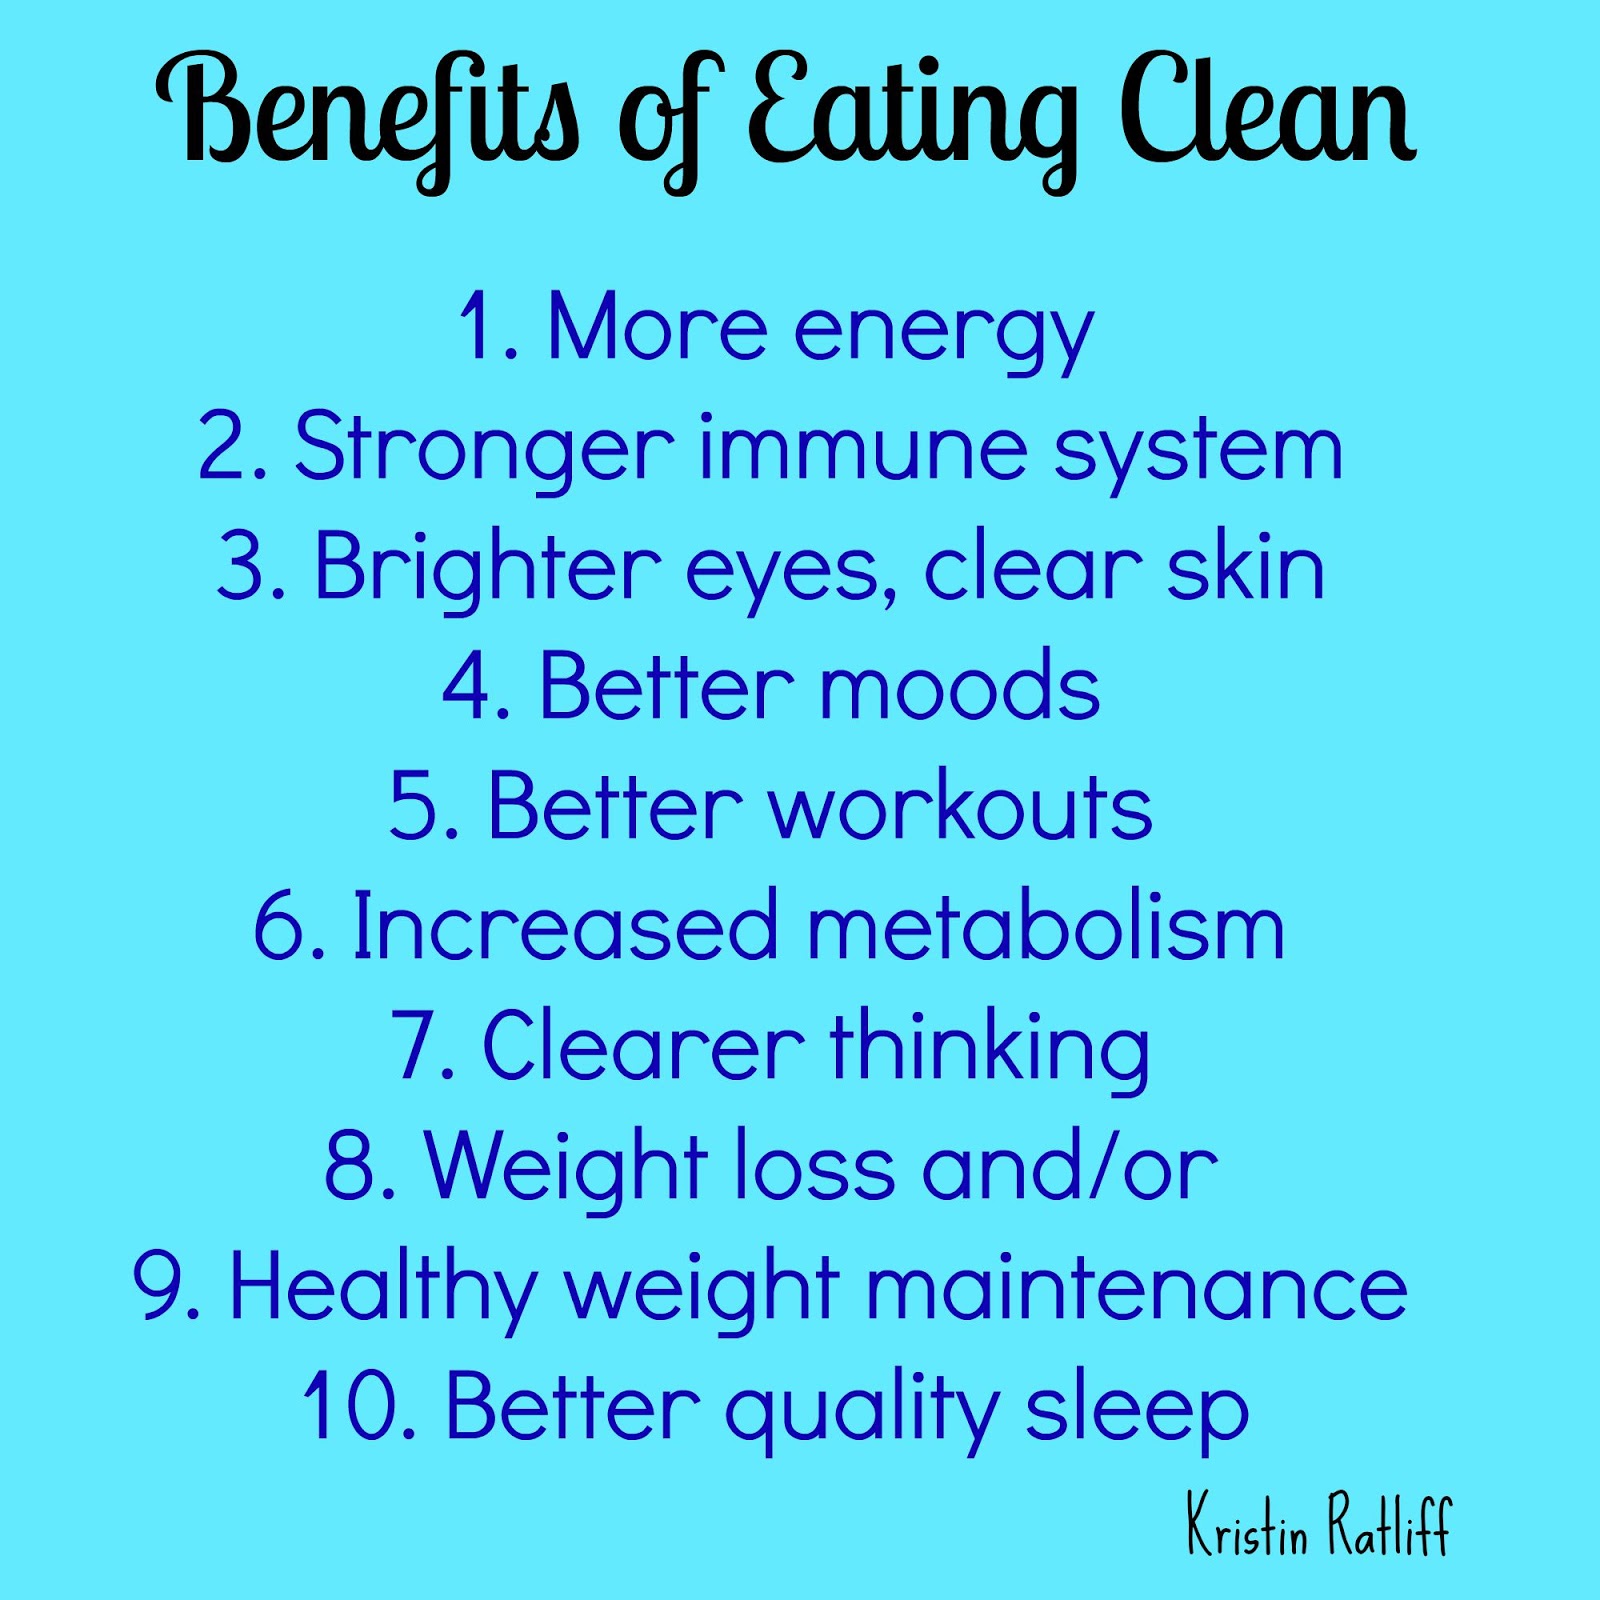 What are some benefits to doing a seven-day cleansing diet?